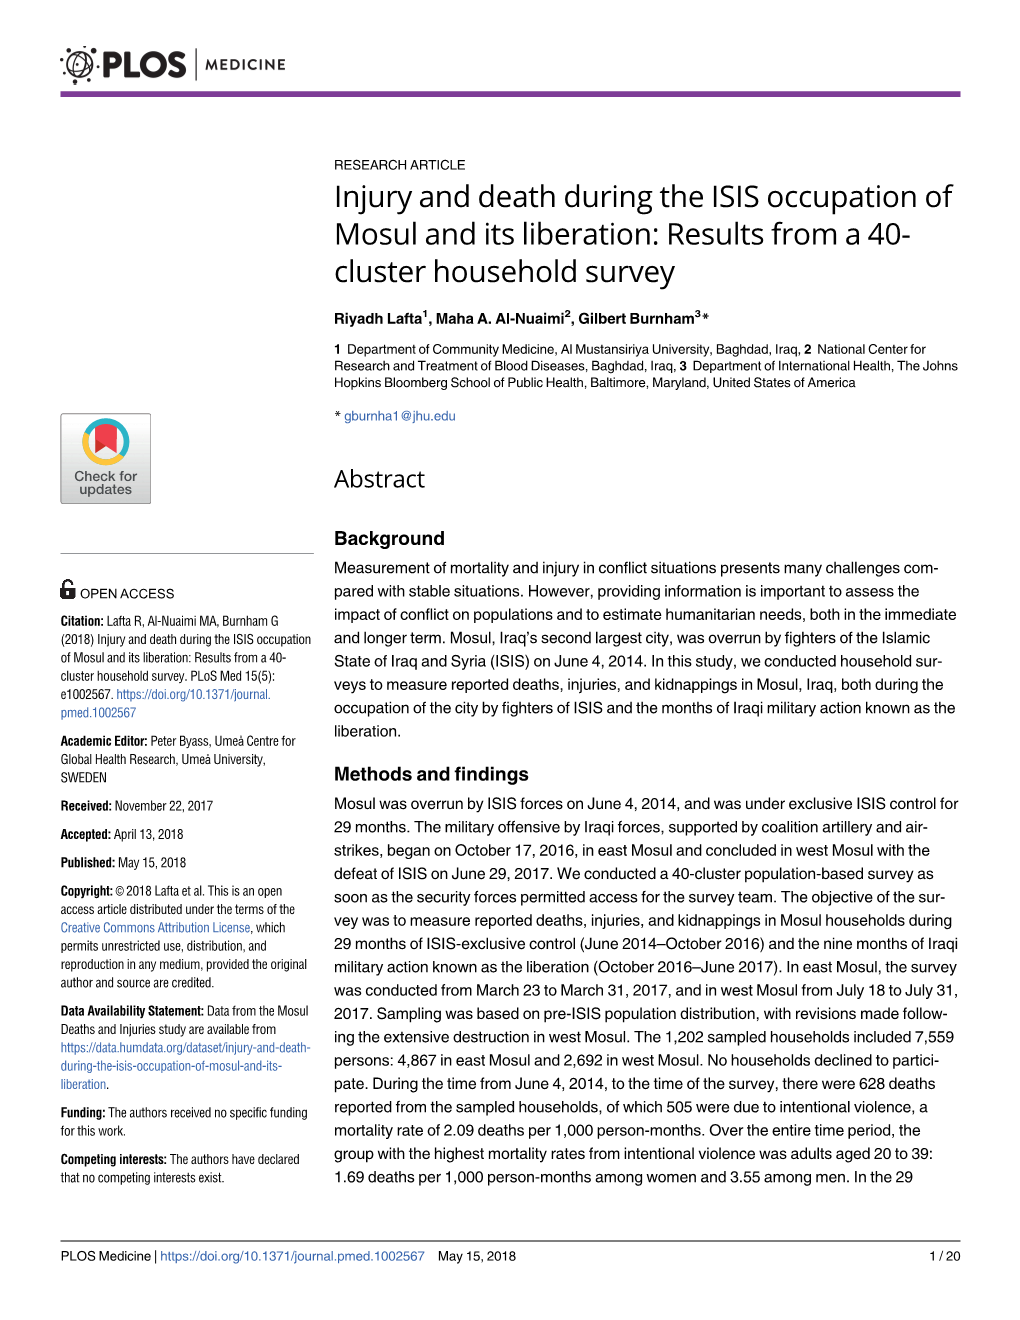 Injury and Death During the ISIS Occupation of Mosul and Its Liberation: Results from a 40- Cluster Household Survey